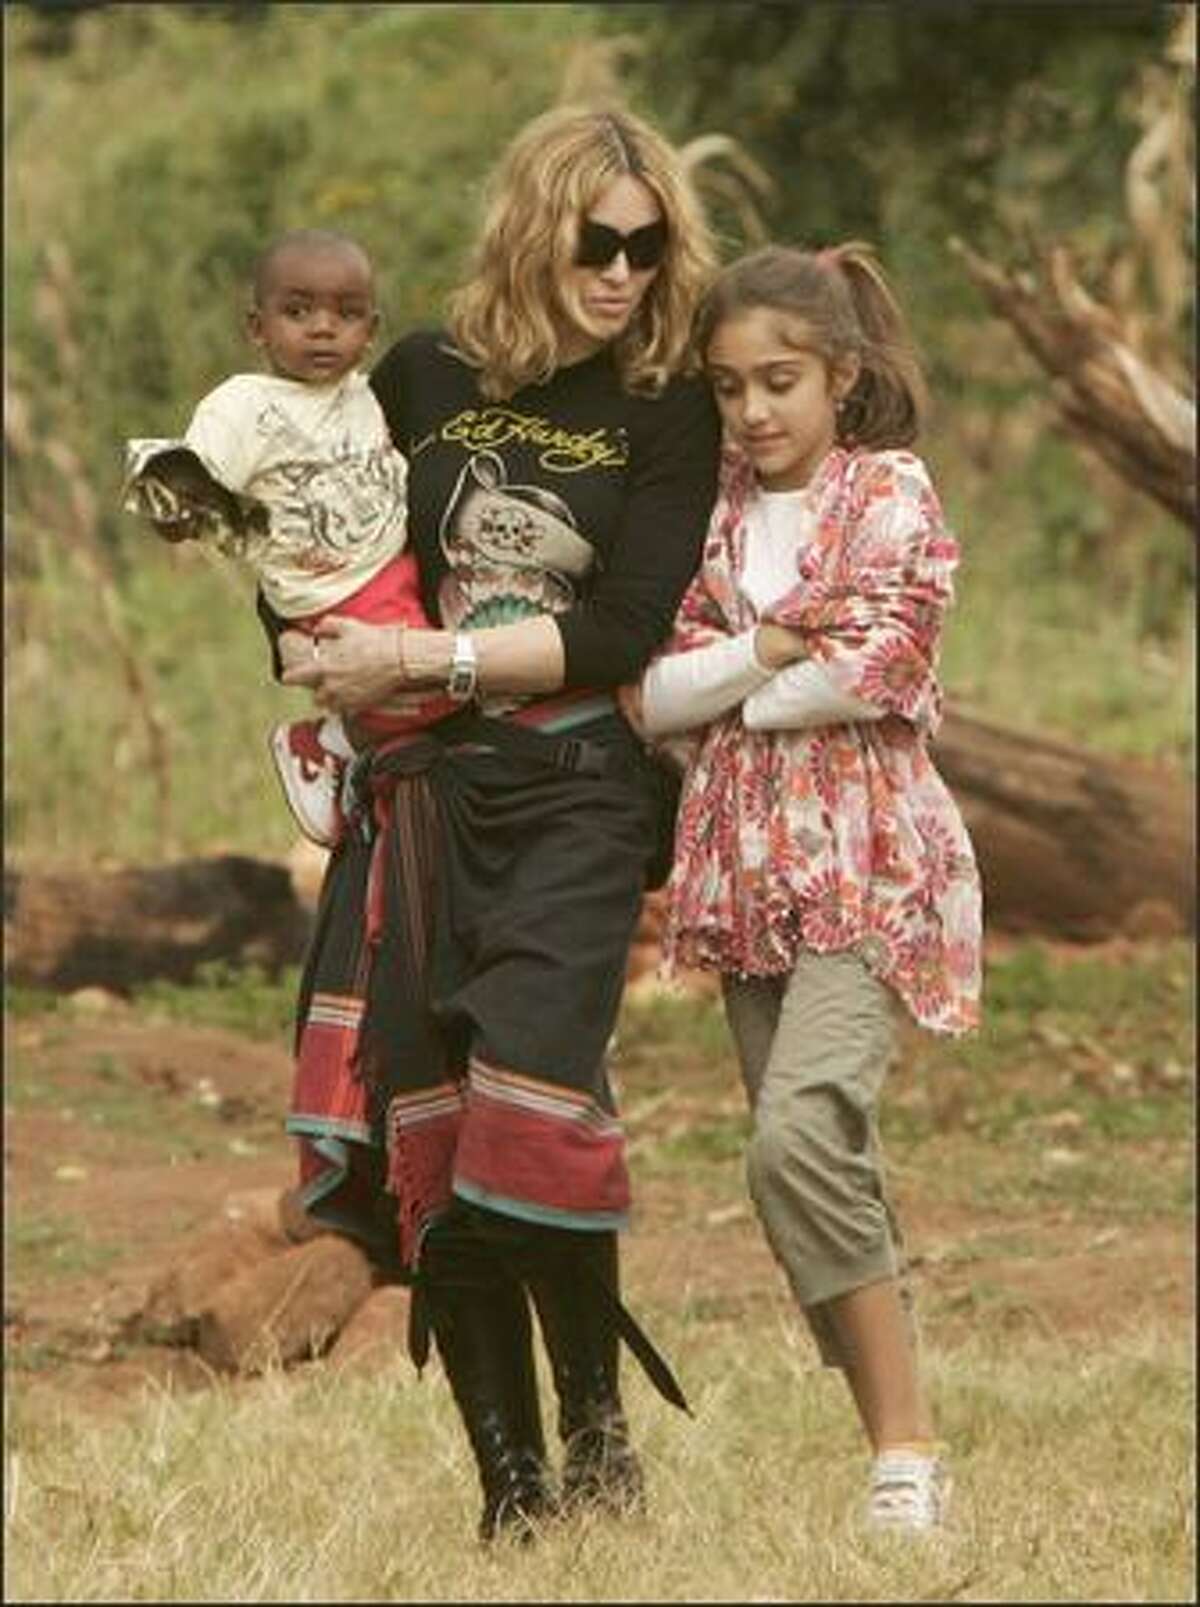 Madonna carries her adopted son David at the Home of Hope orphanage in Mchinji village, Malawi, April 17, 2007. Malawi police and stone-throwing school students blocked journalists from covering the pop star's visit to the orphanage, where the boy was due to meet his biological father. At right is Madonna's daughter Lourdes.